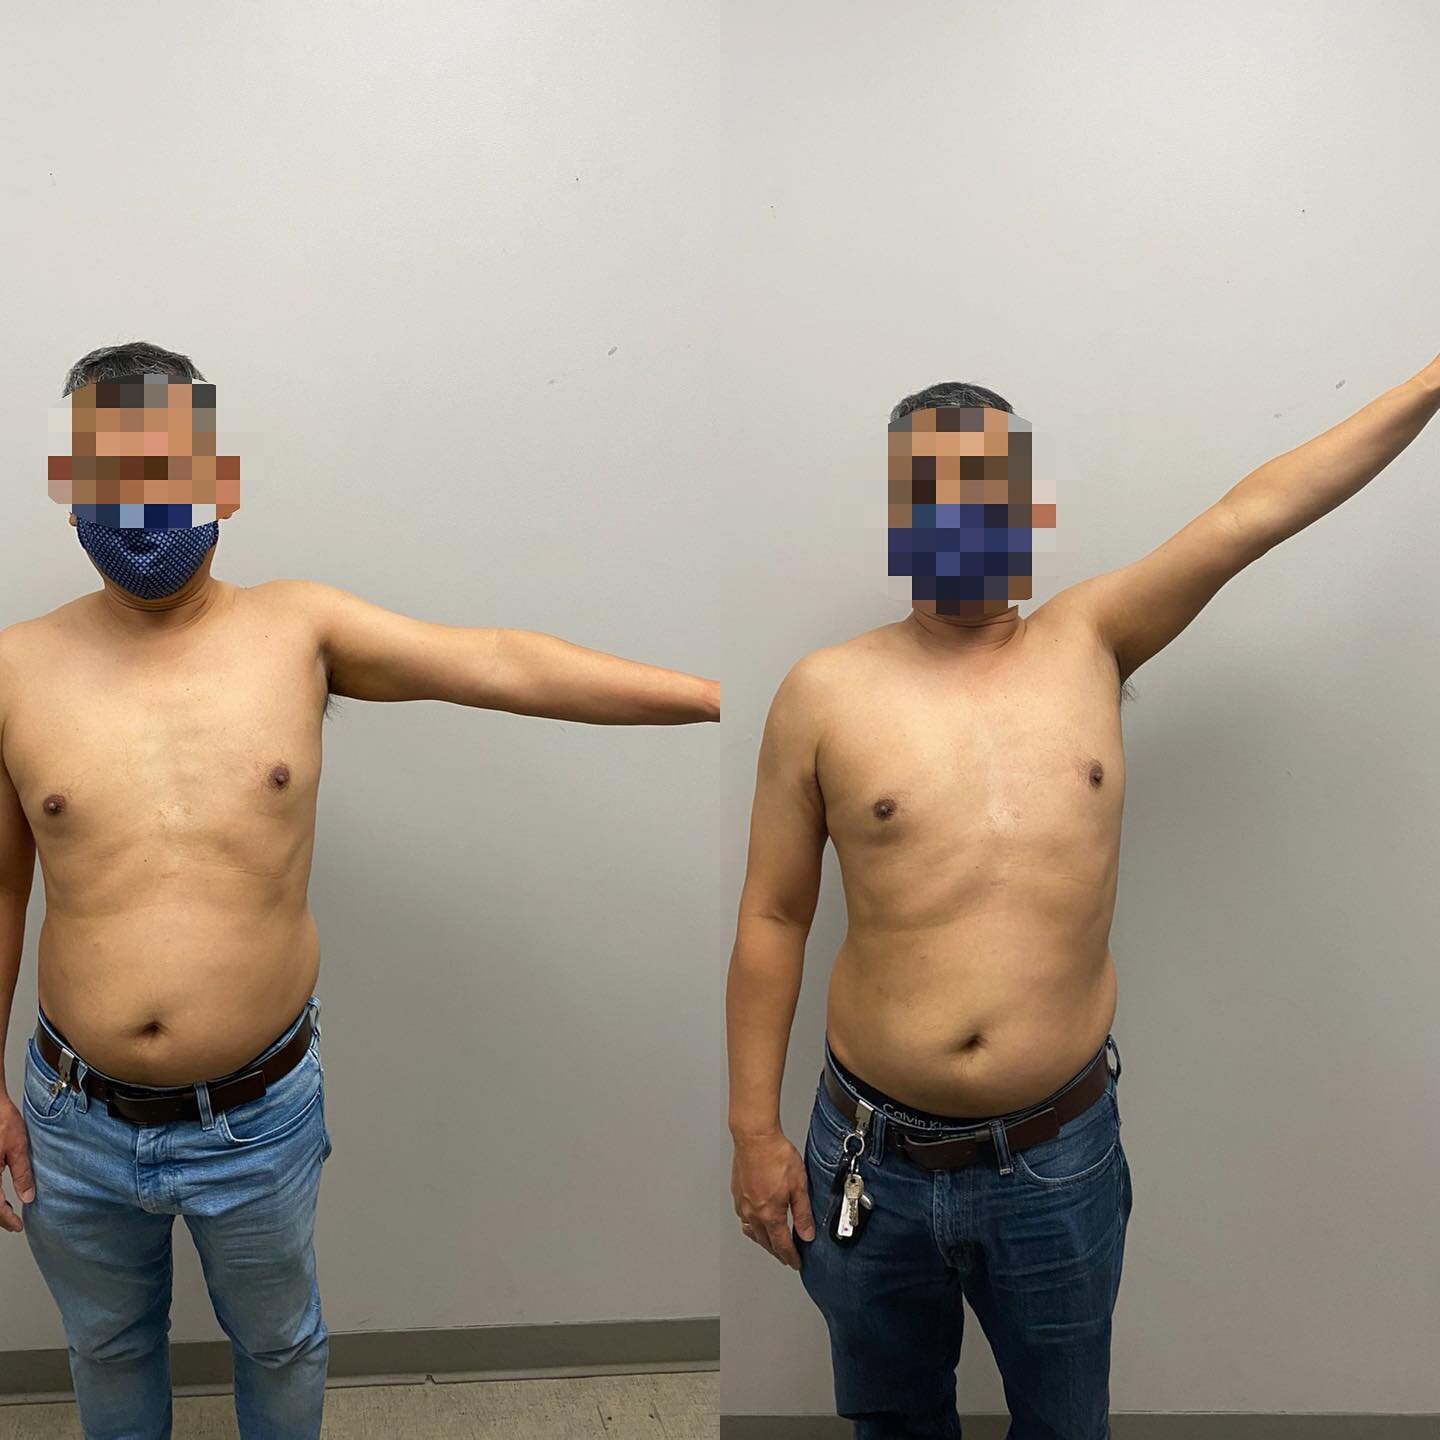 First vs. Third treatment for Frozen Shoulder. Let&rsquo;s just say the patient is super happy with the results since he&rsquo;s been dealing with this for 2 years and has tried injection therapy and other physical therapy. 
.
.
.
#frozenshoulder #fr